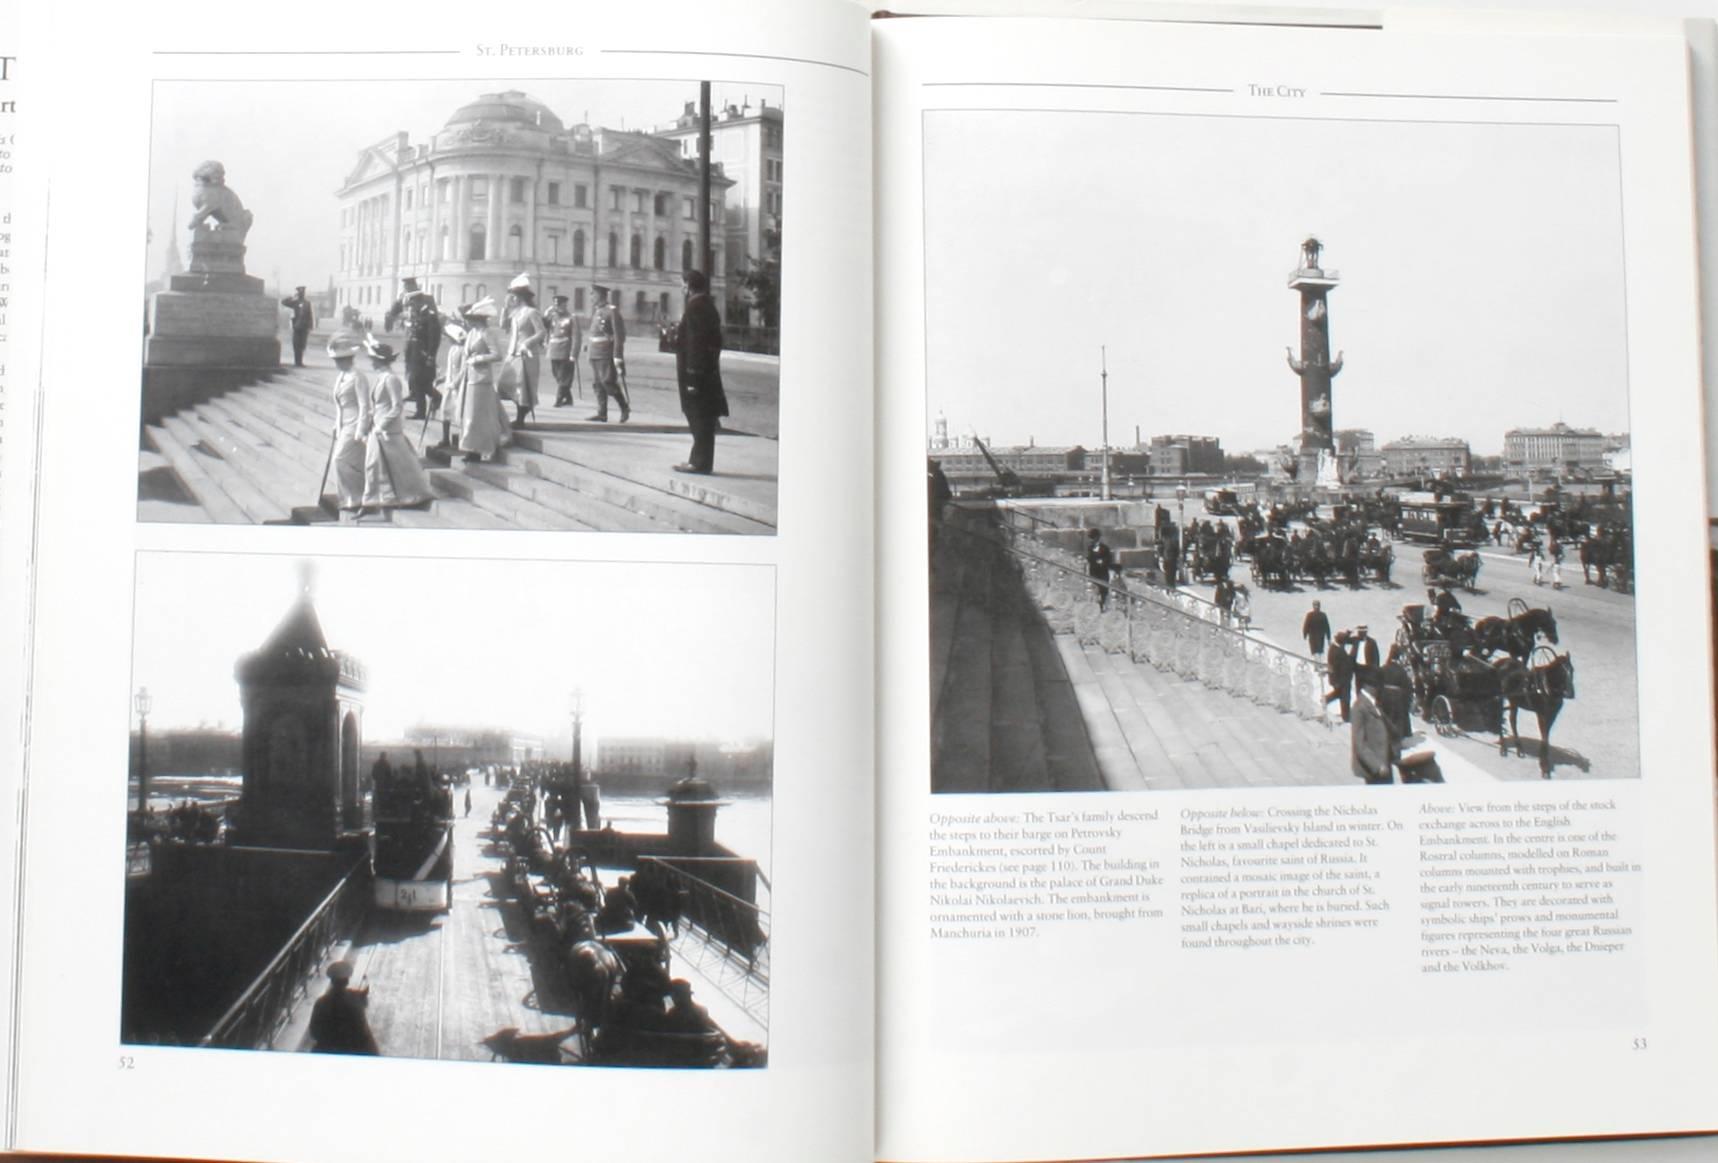 St. Petersburg, Portrait of an Imperial City. New York: Vendome Press, 1990. First edition hardcover with dust jacket. 240 pp. A beautiful book on the Imperial City of St. Petersburg Russia. It has 300 previously unpublished b/w photographs from the